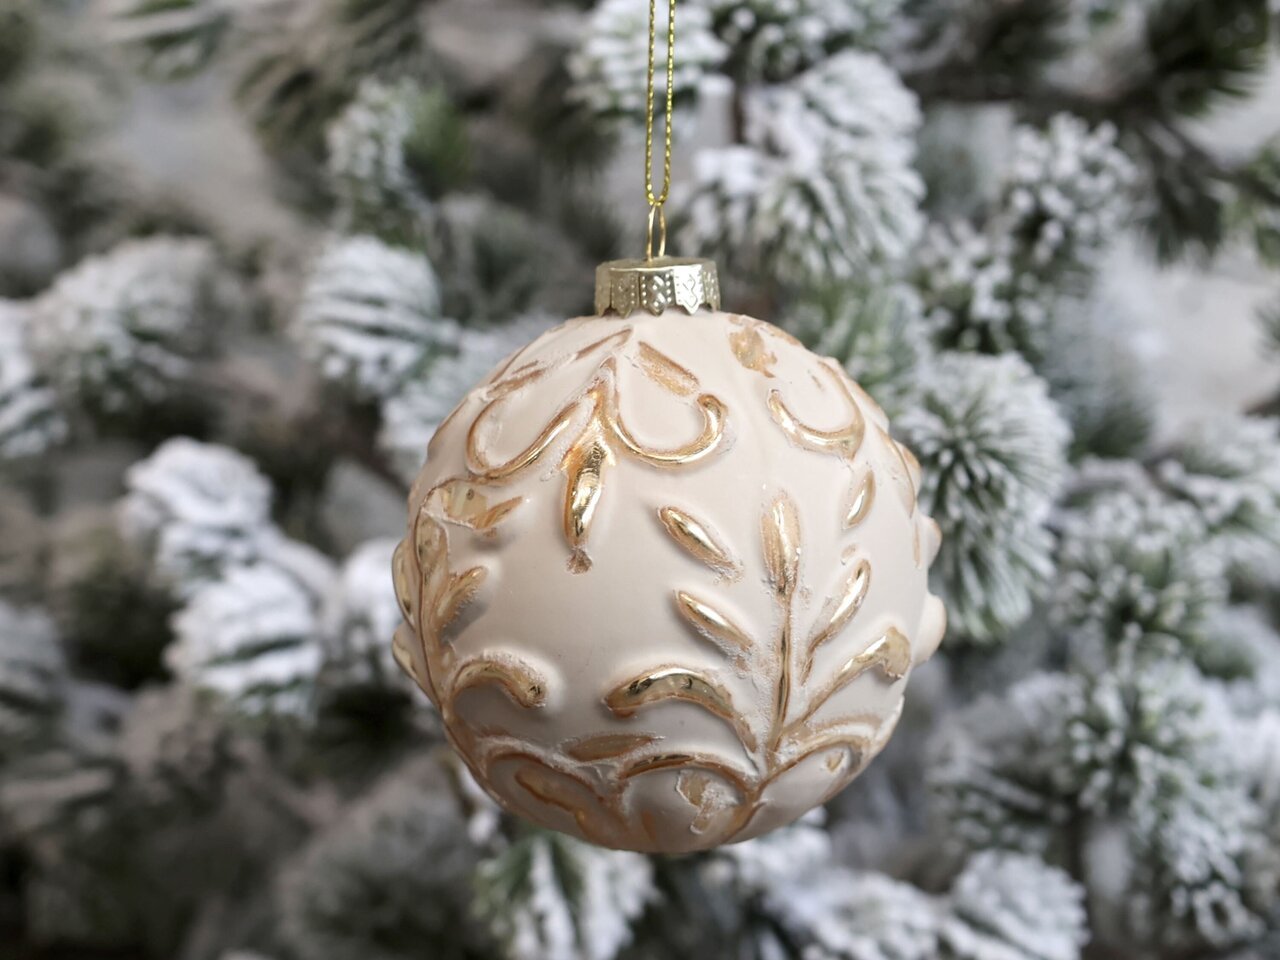 Chic Antique Weihnachtskugel mit Goldmuster Vrilles Preview Image